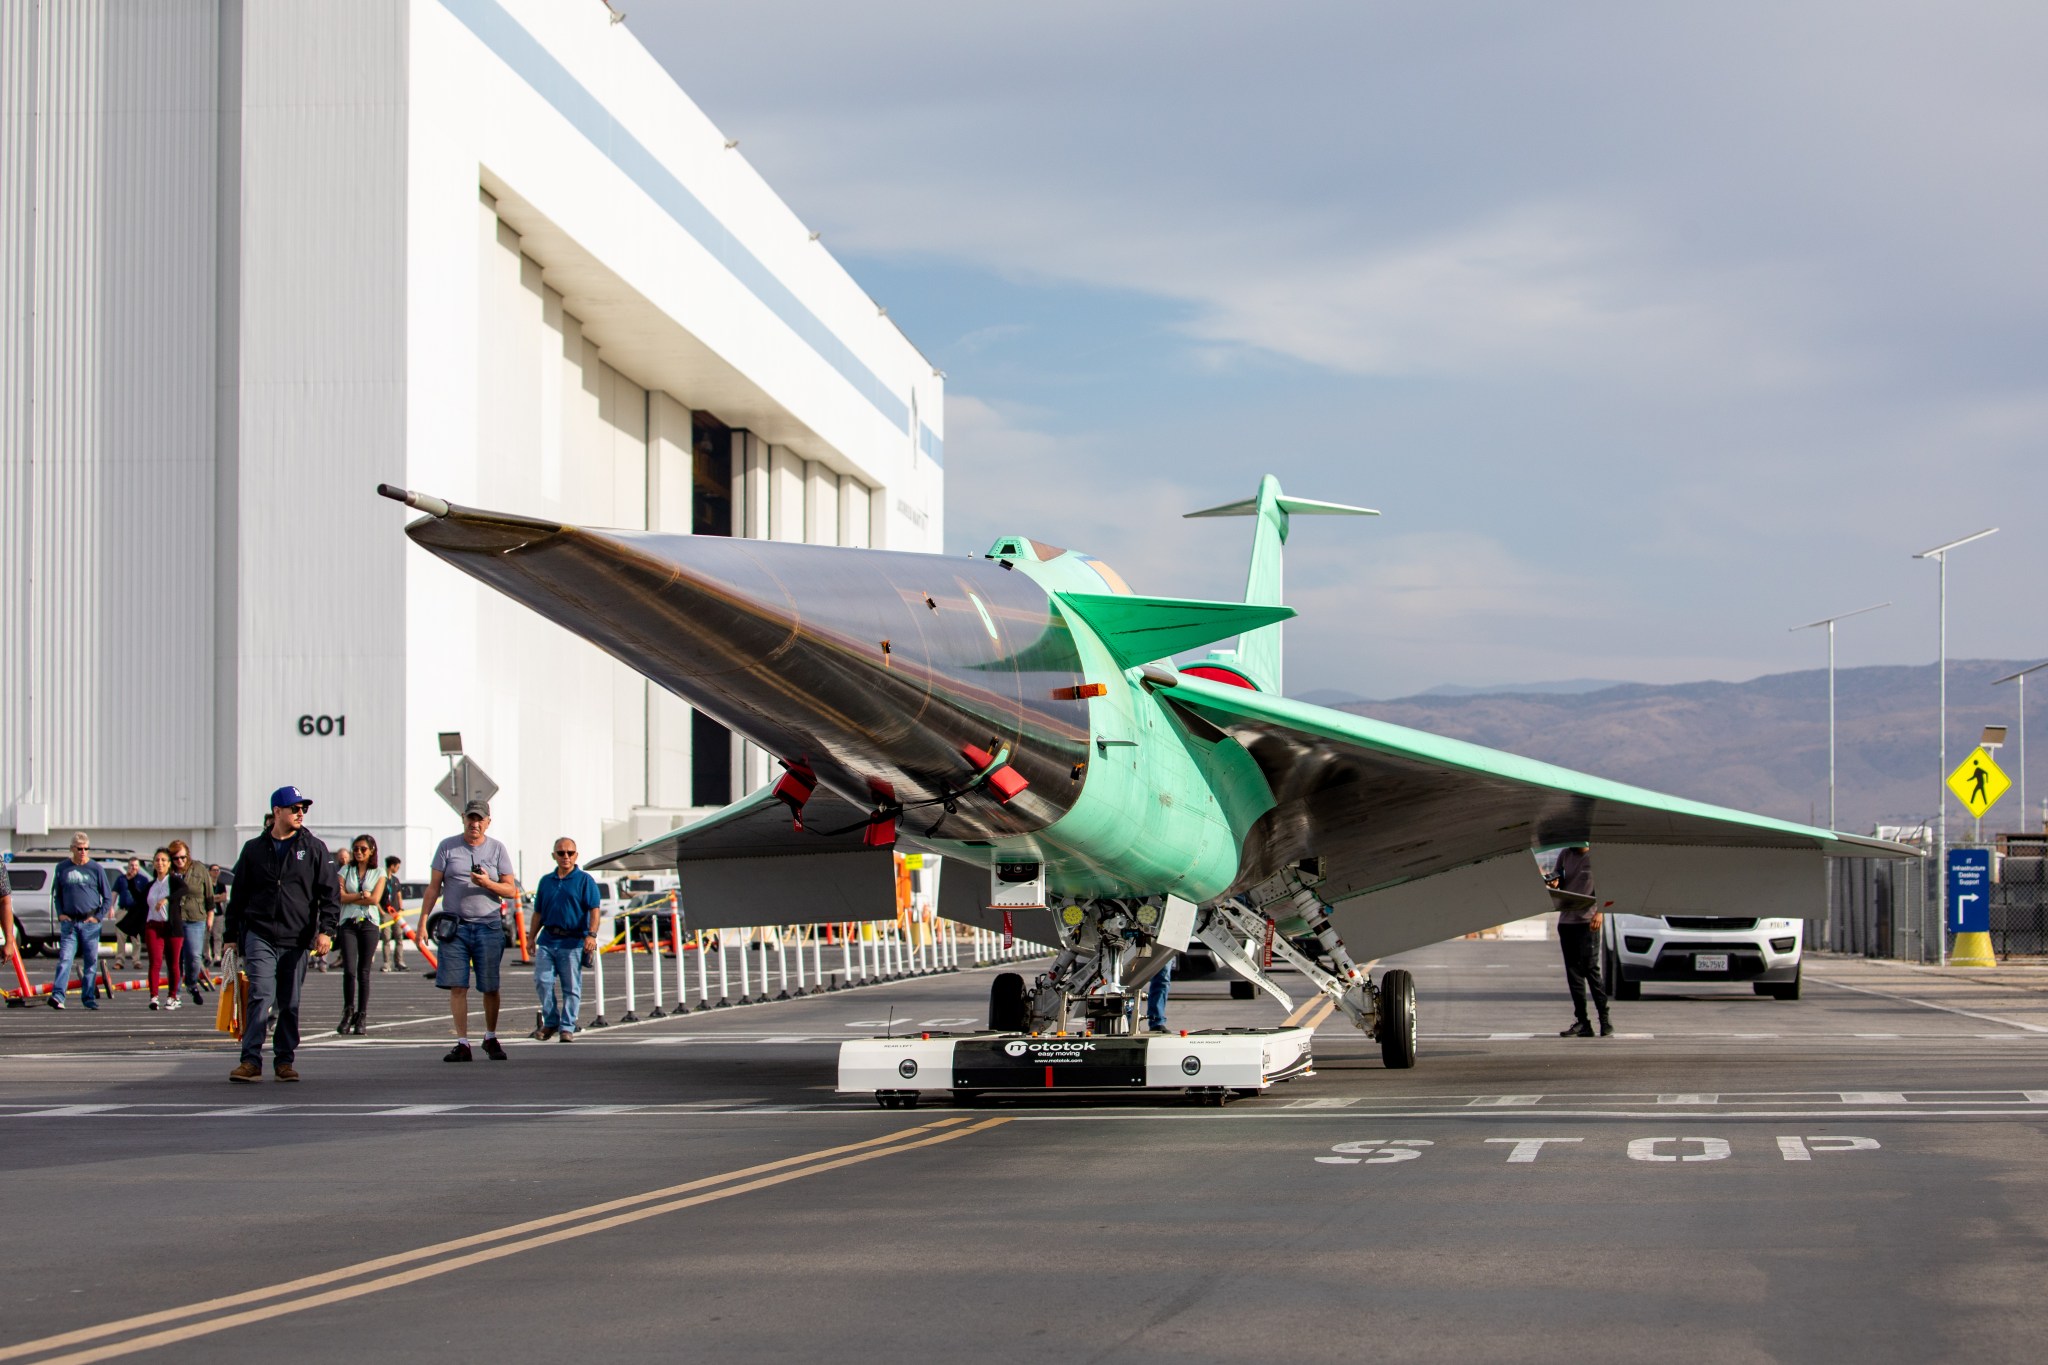 The X-59 Quesst aircraft is rolled out at Lockheed Martin’s facility in Palmdale, California. Photo credit: Lockheed Martin